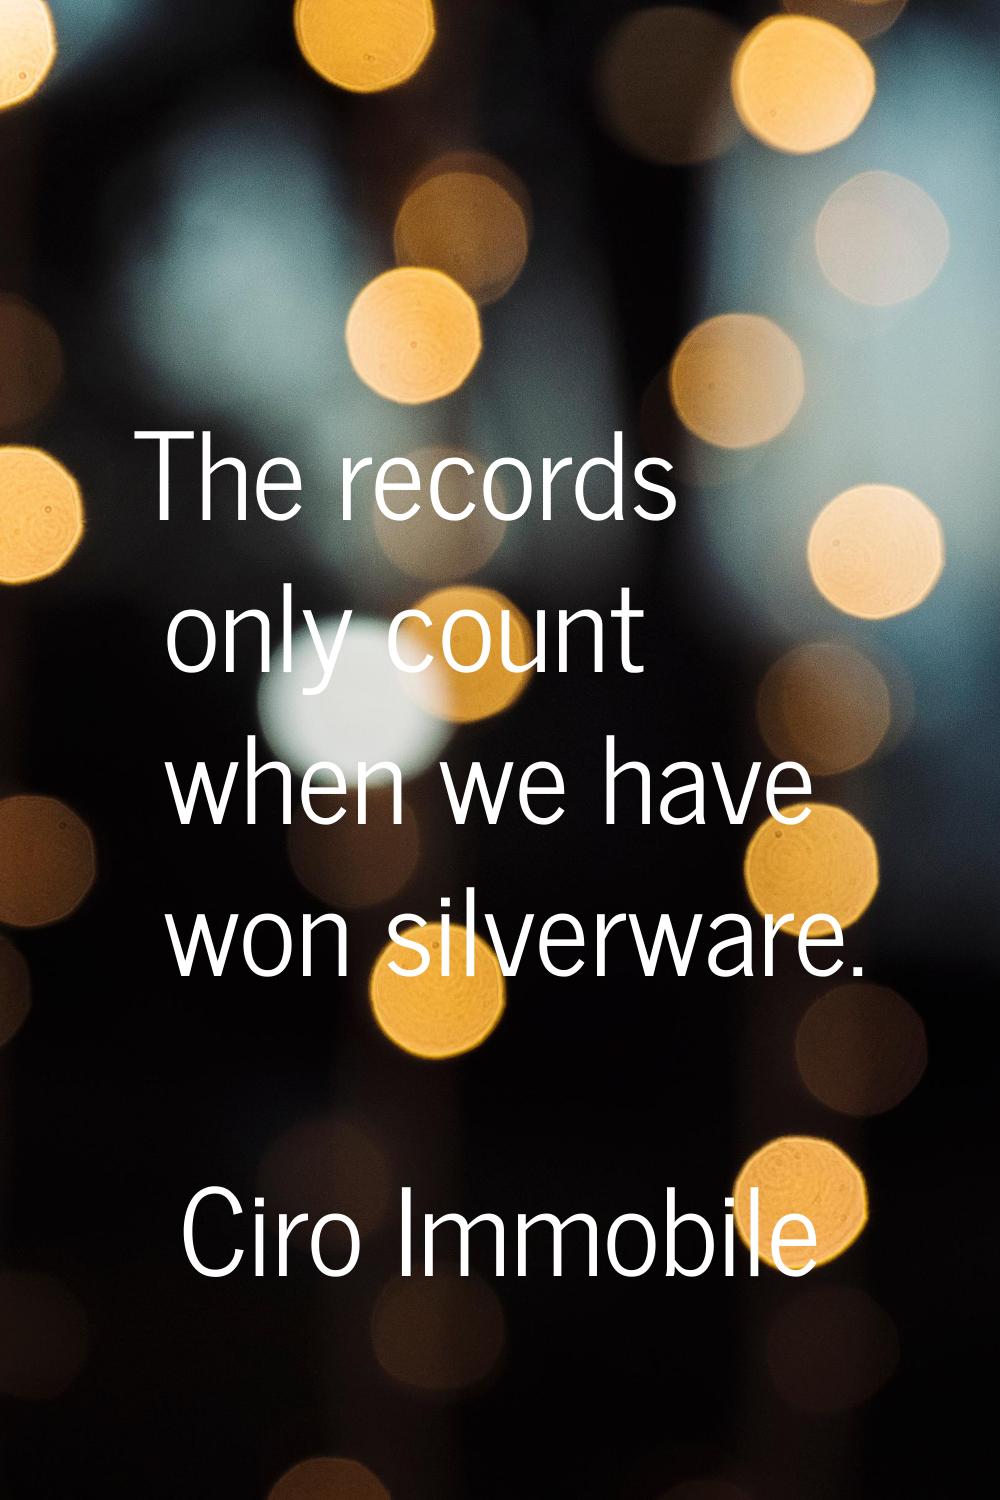 The records only count when we have won silverware.